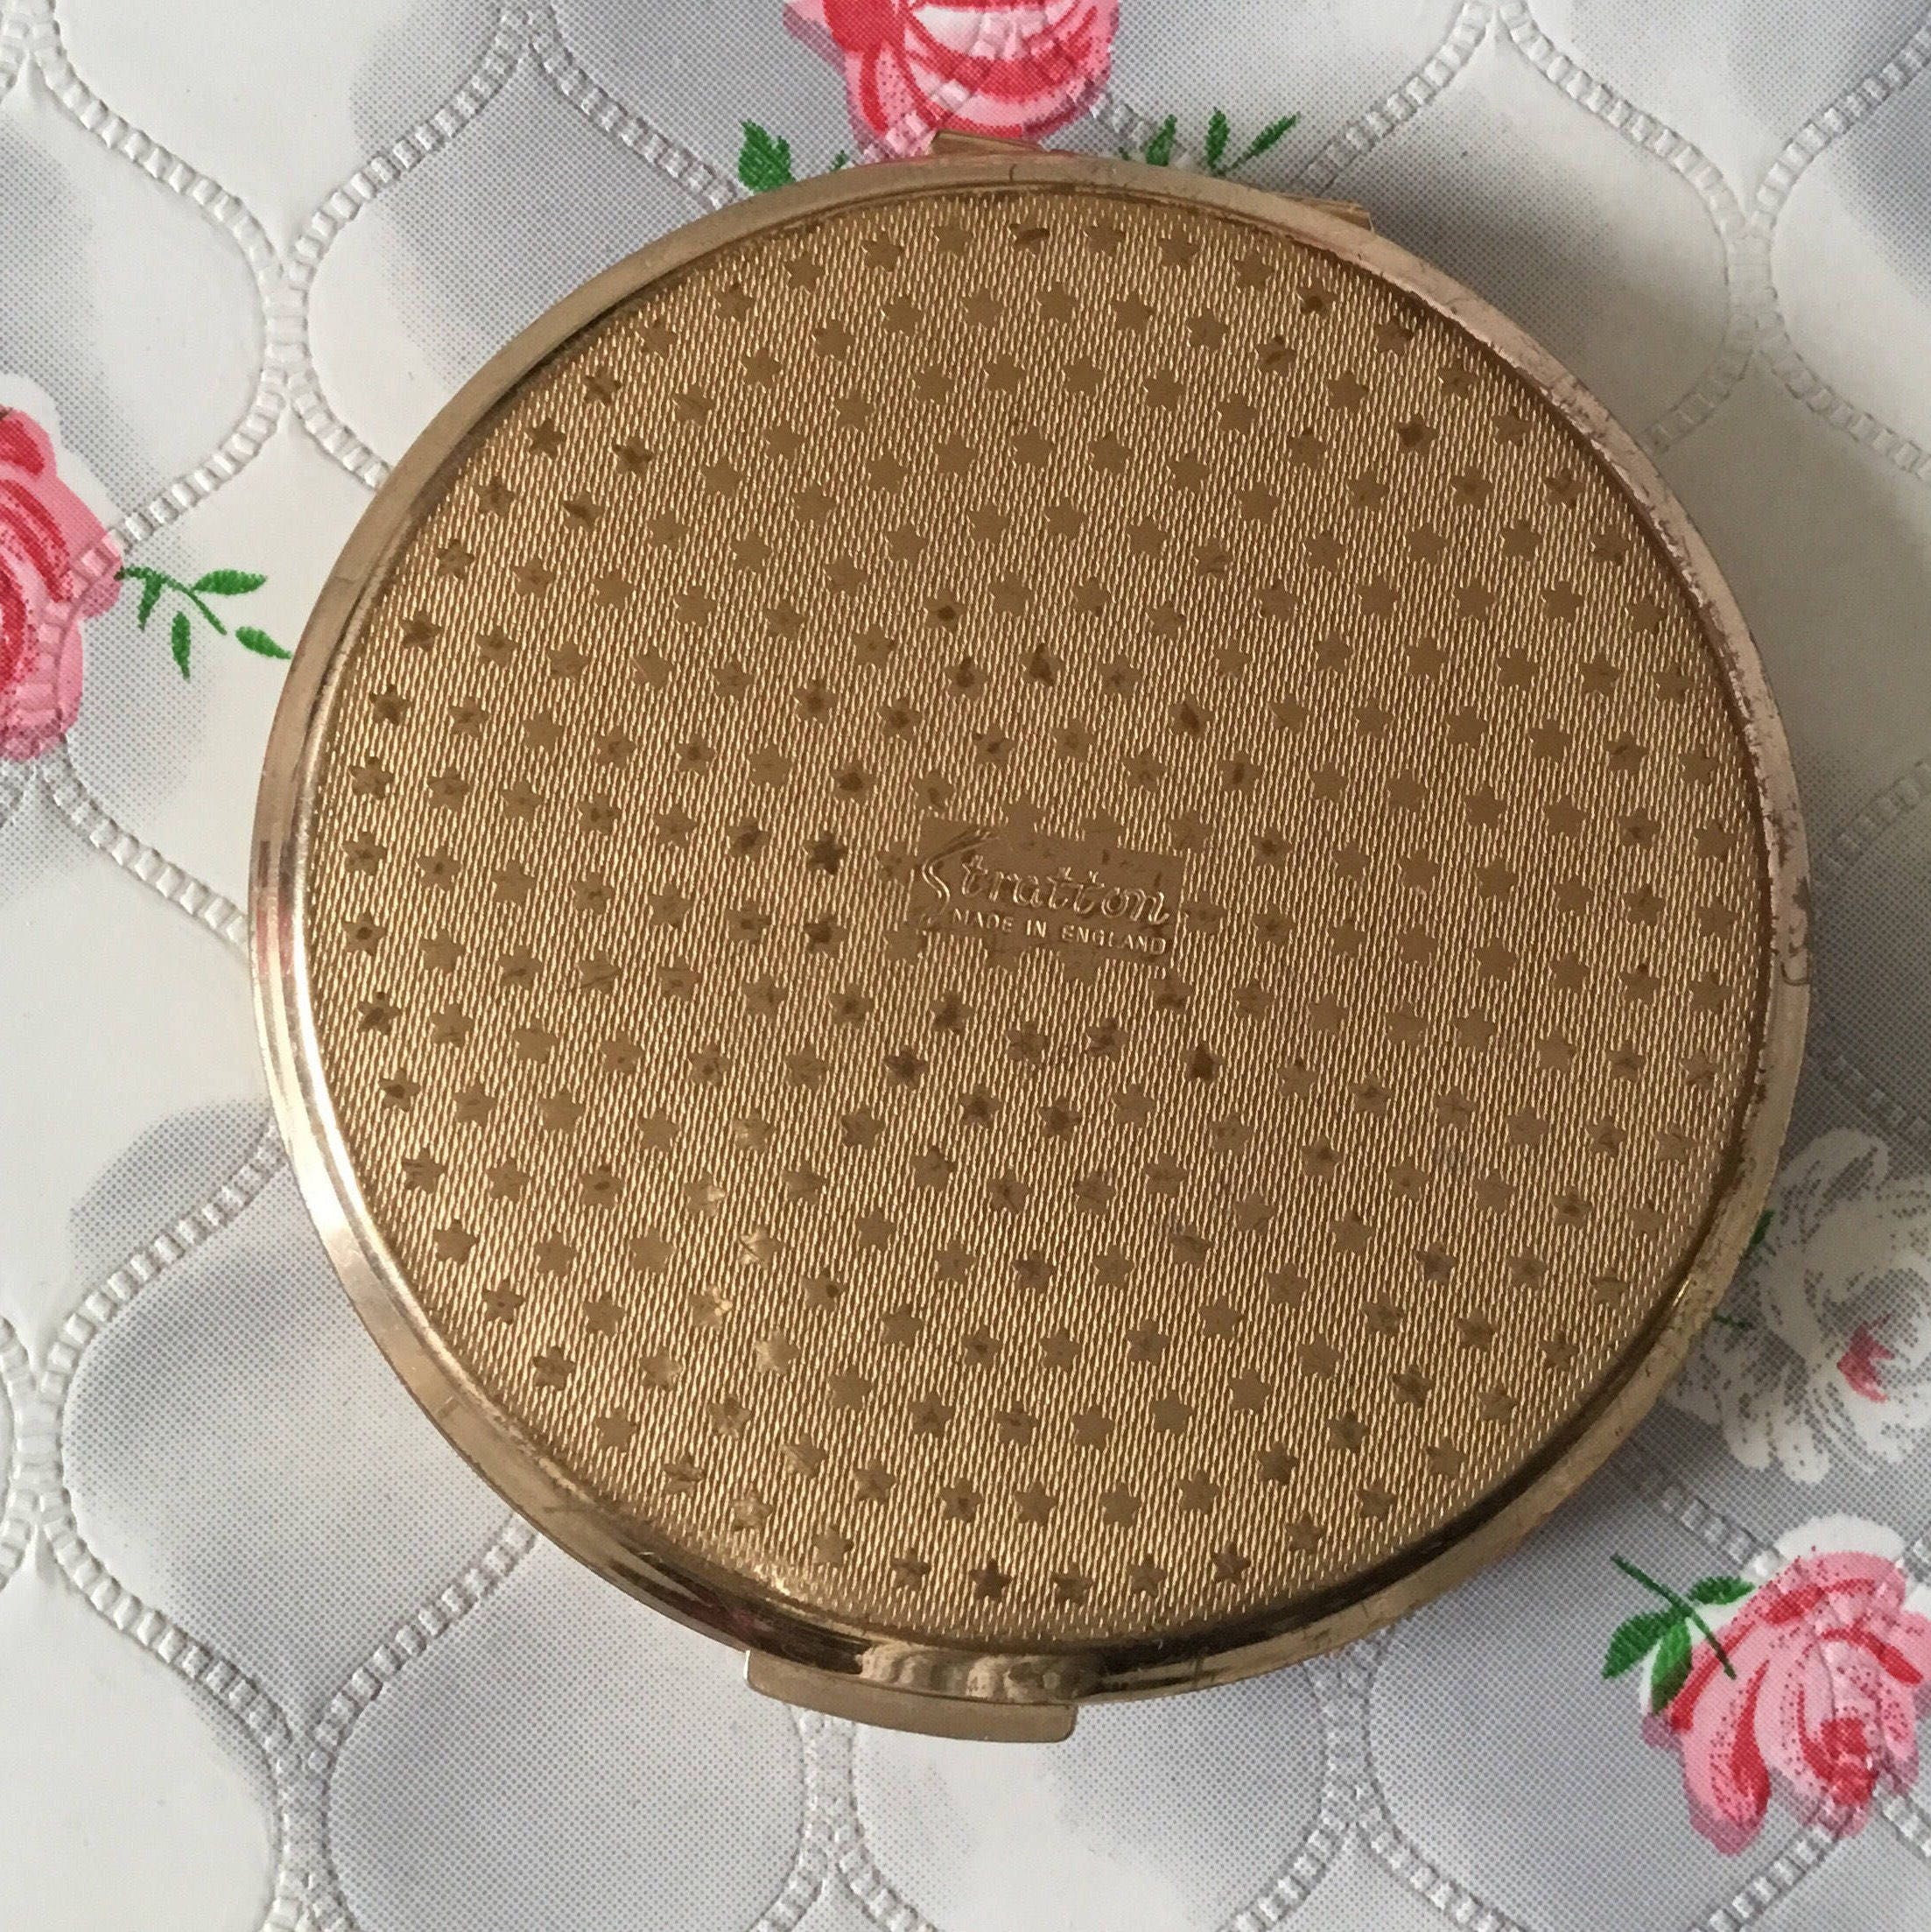 Vintage purple Stratton convertible powder compact, c 1960s or 1970s.